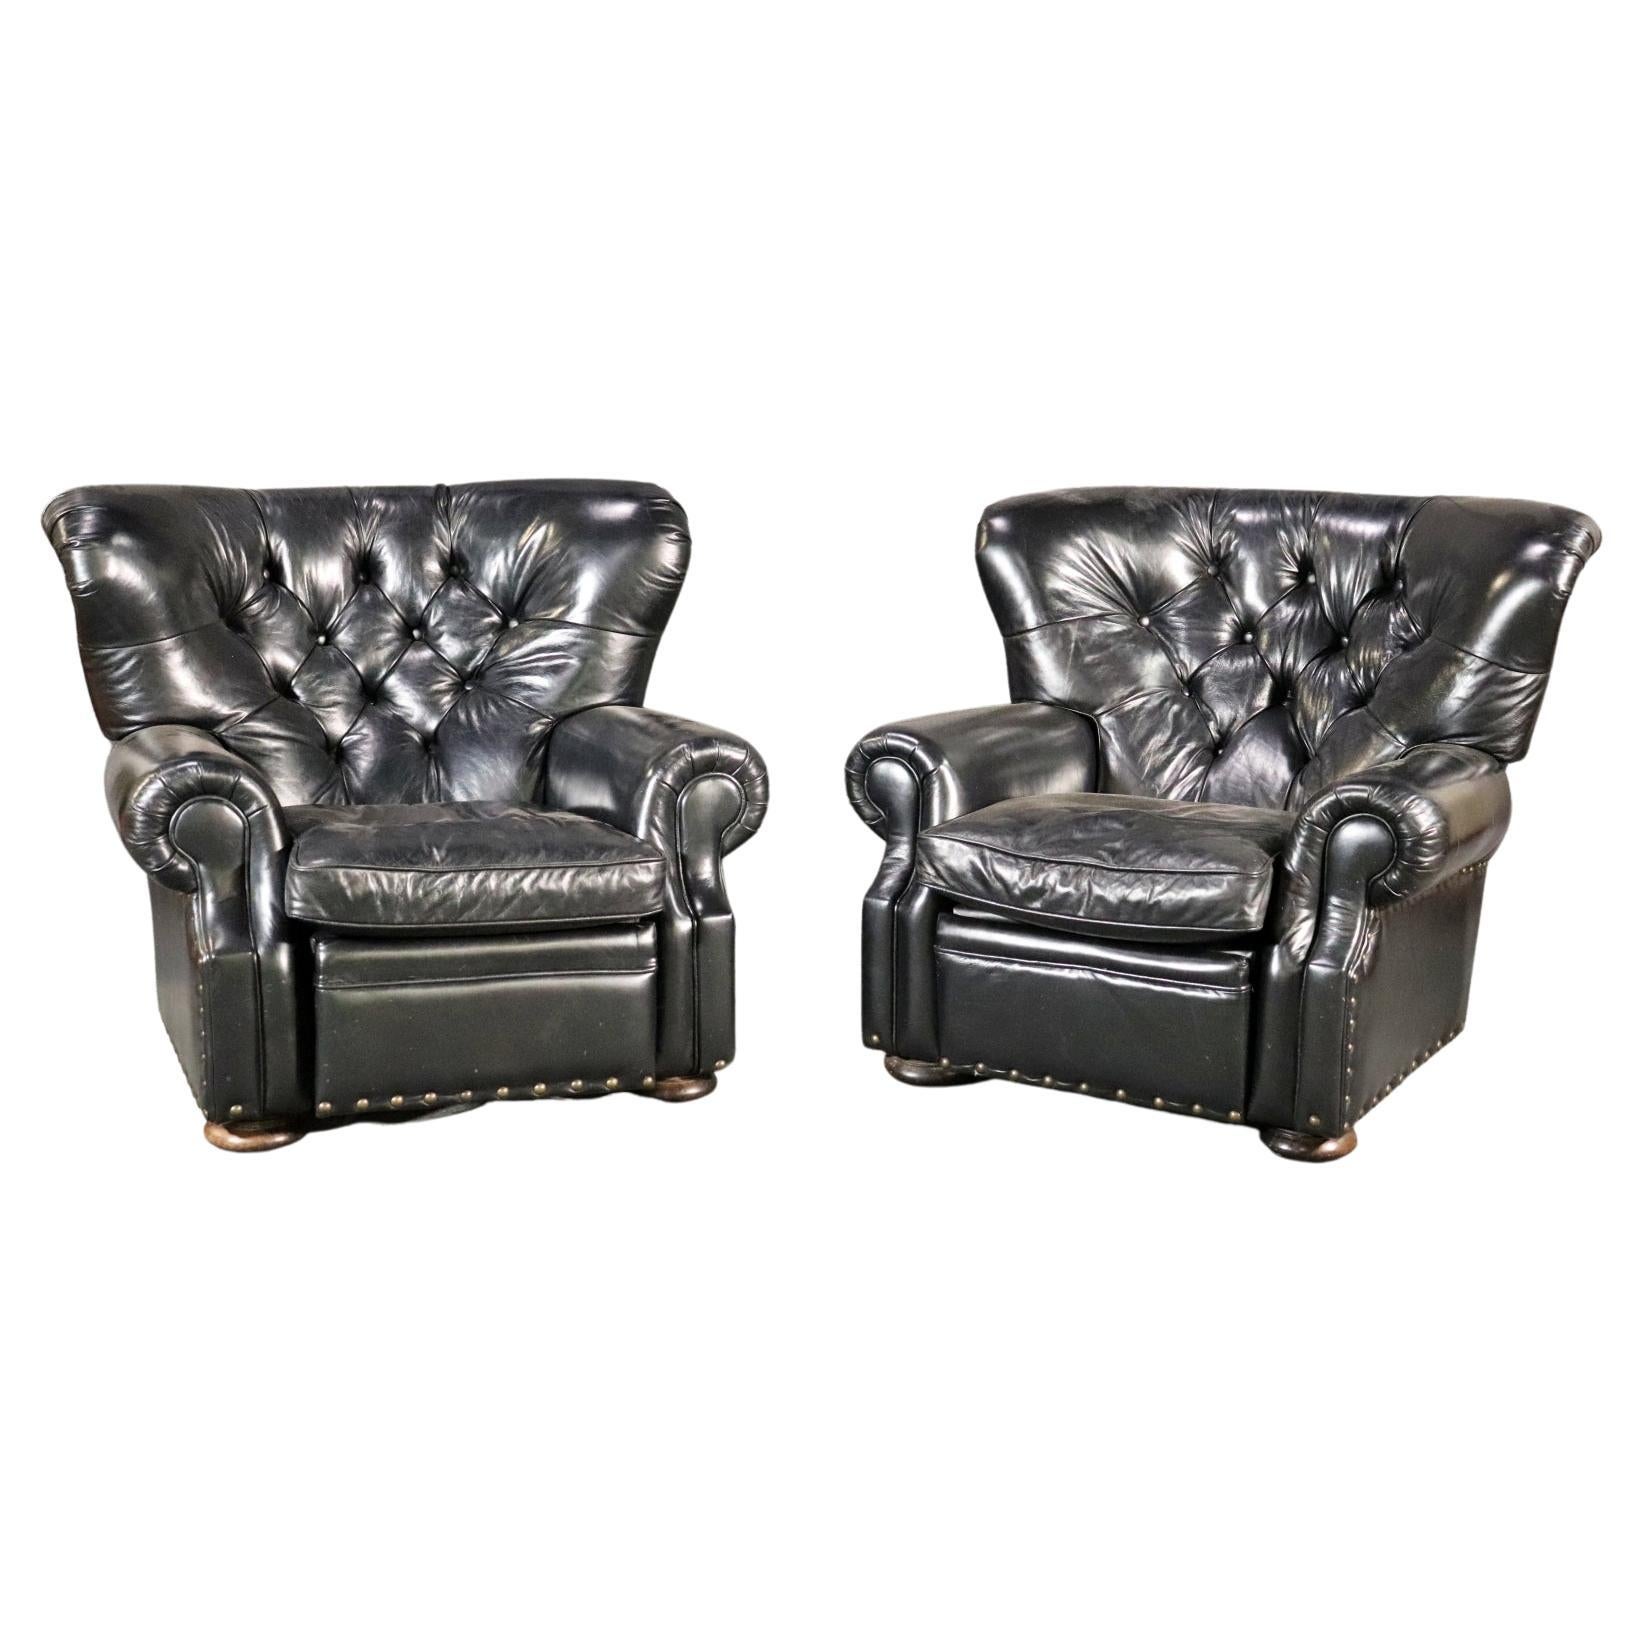 Pair of Tufted English Georgian Style Club Chairs Recliners 